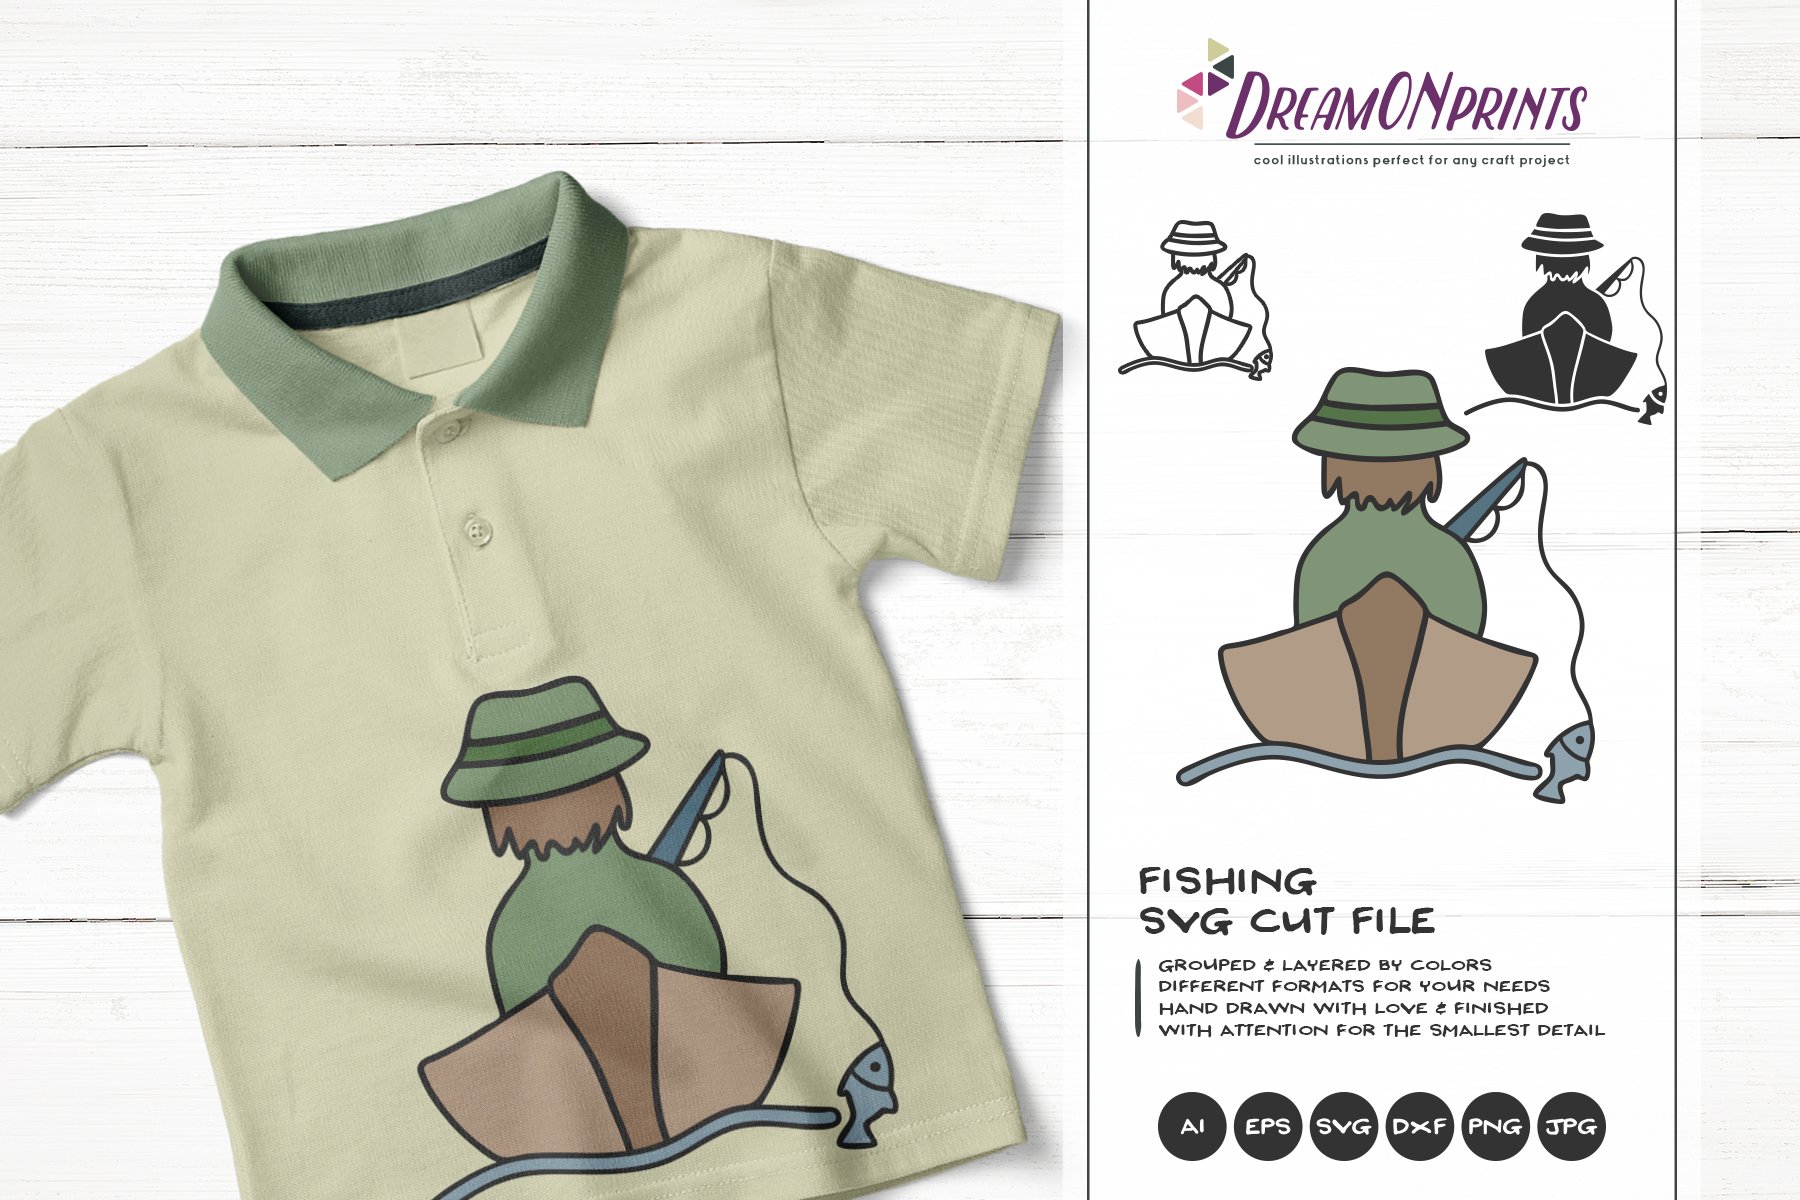 Olive t-shirt with a frog.